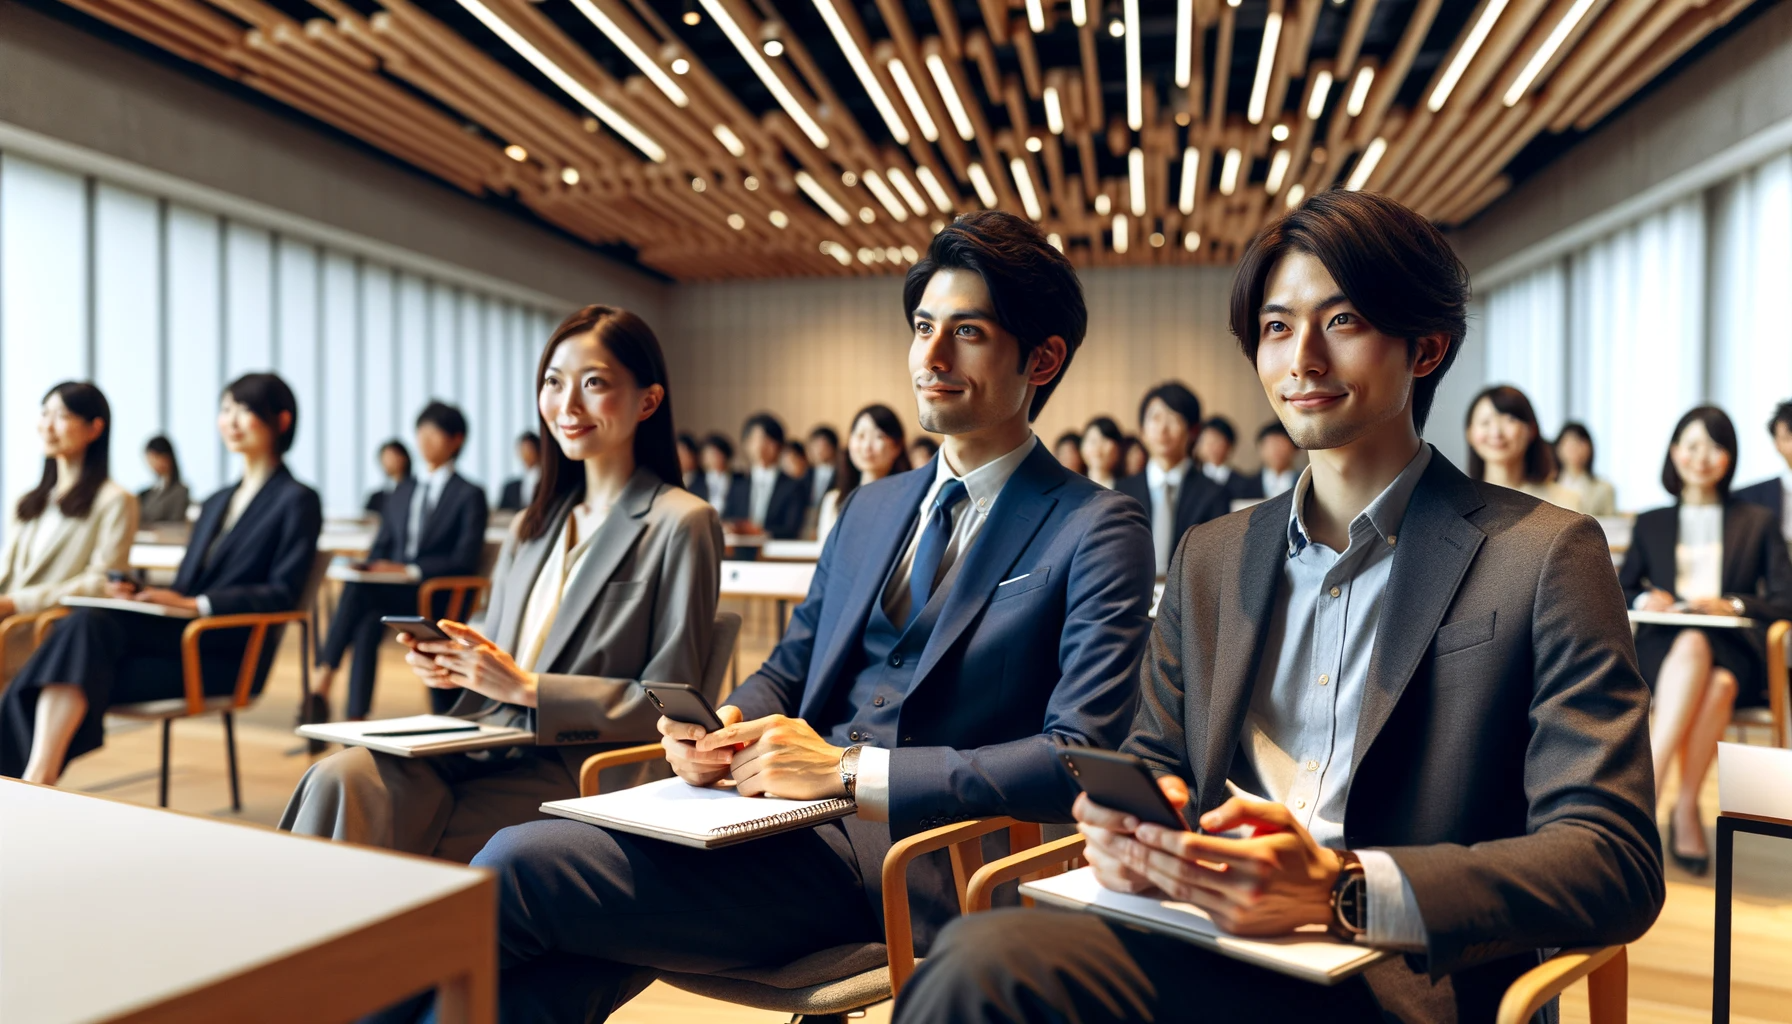 DALL·E 2023-12-22 15.39.25 - Japanese business professionals seated in a modern conference hall, attentively listening to a lecture while holding smartphones. The setting is conte